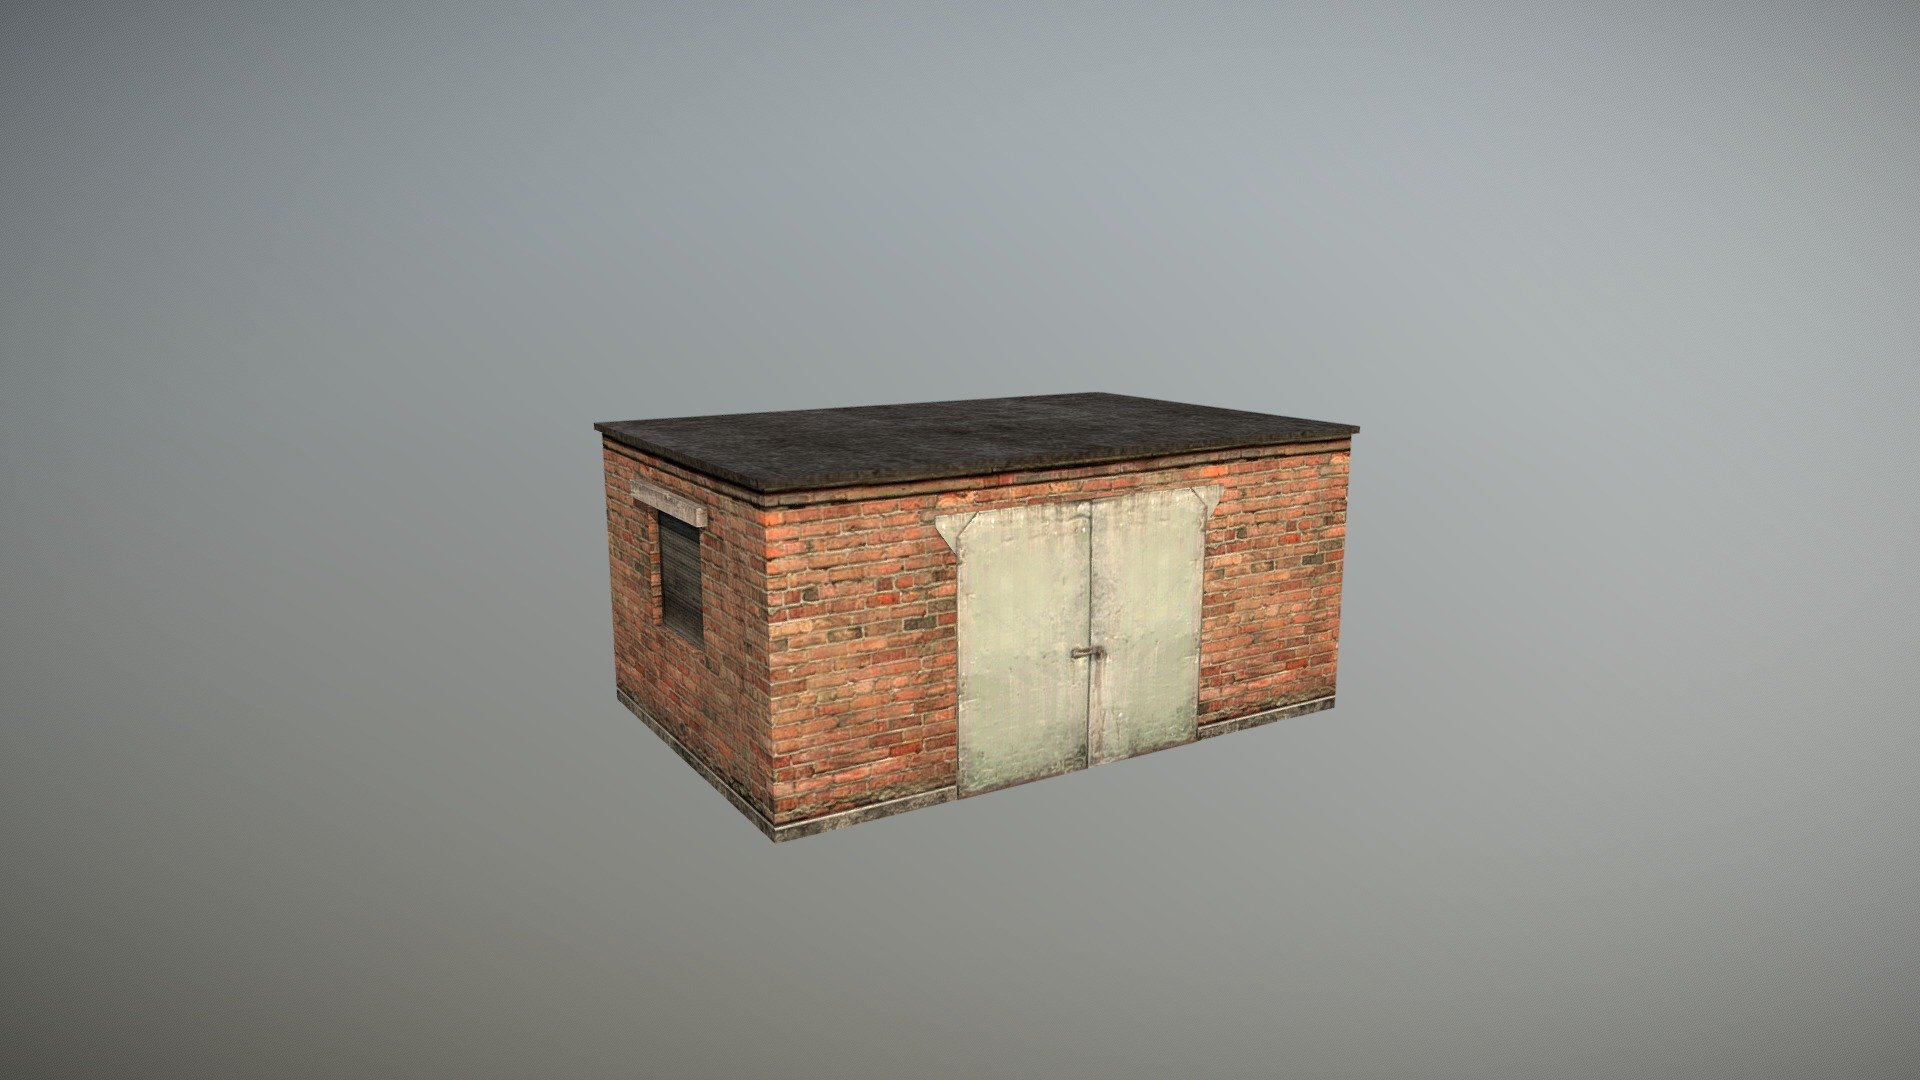 Railway Shed RW_Shed_05


LOD0 - (triangles 104) / (points 68)

Low-poly 3D model Railway Shed 


Textures for PBR shader (Albedo, AmbietOcclusion, Gloss, Specular, NormalMap) they may be used with Unity3D, Unreal Engine. 
All pictures (previews) REALTIME rendering

Textures for WINTER



Textures:


RW_Shed_05_Albedo.png         - 1024x1024
RW_Shed_05_AmbientOcclusion.png   - 1024x1024
RW_Shed_05_Gloss.png          - 1024x1024
RW_Shed_05_Specular.png       - 1024x1024

RW_Shed_05_NormalMap.png      - 1024x1024     



Pack for WINTER





If you have questions about my models or need any kind of help, feel free to contact me and i'll do my best to help you 3d model